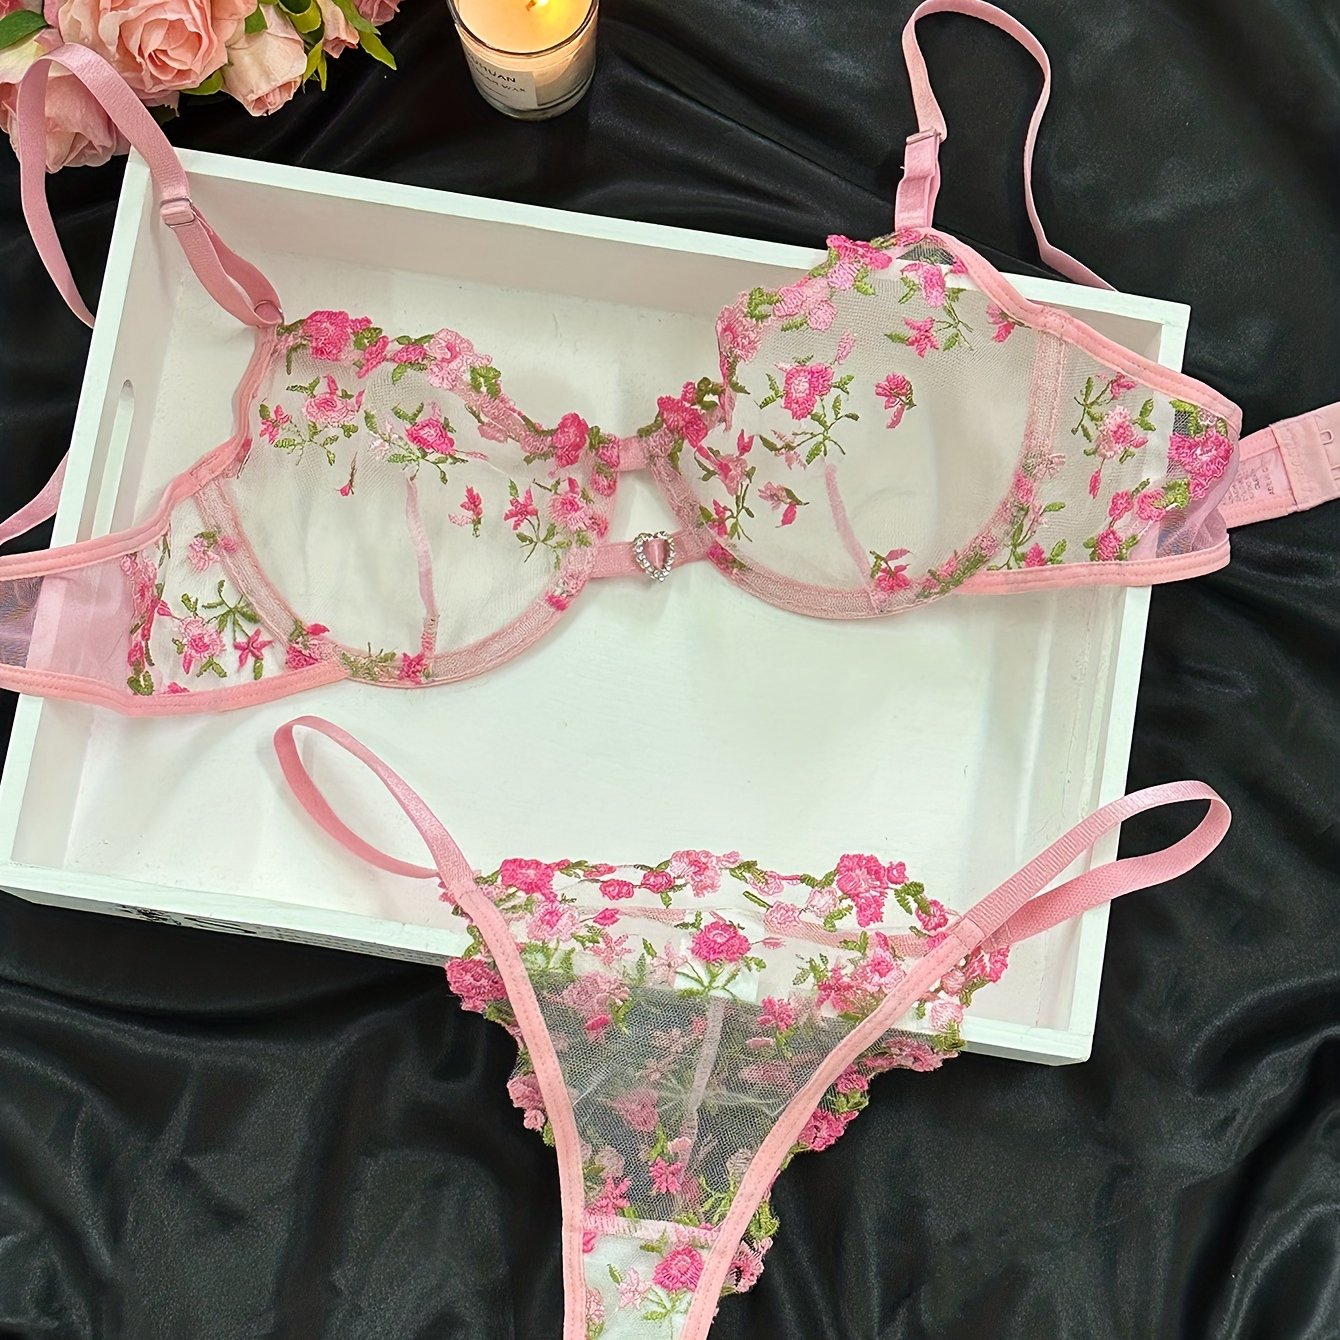 Girlfairy - Floral Embroidery Lingerie Set, Hollow Out Unlined Bra & Sheer Mesh Thong, Women's Sexy Lingerie & Underwear